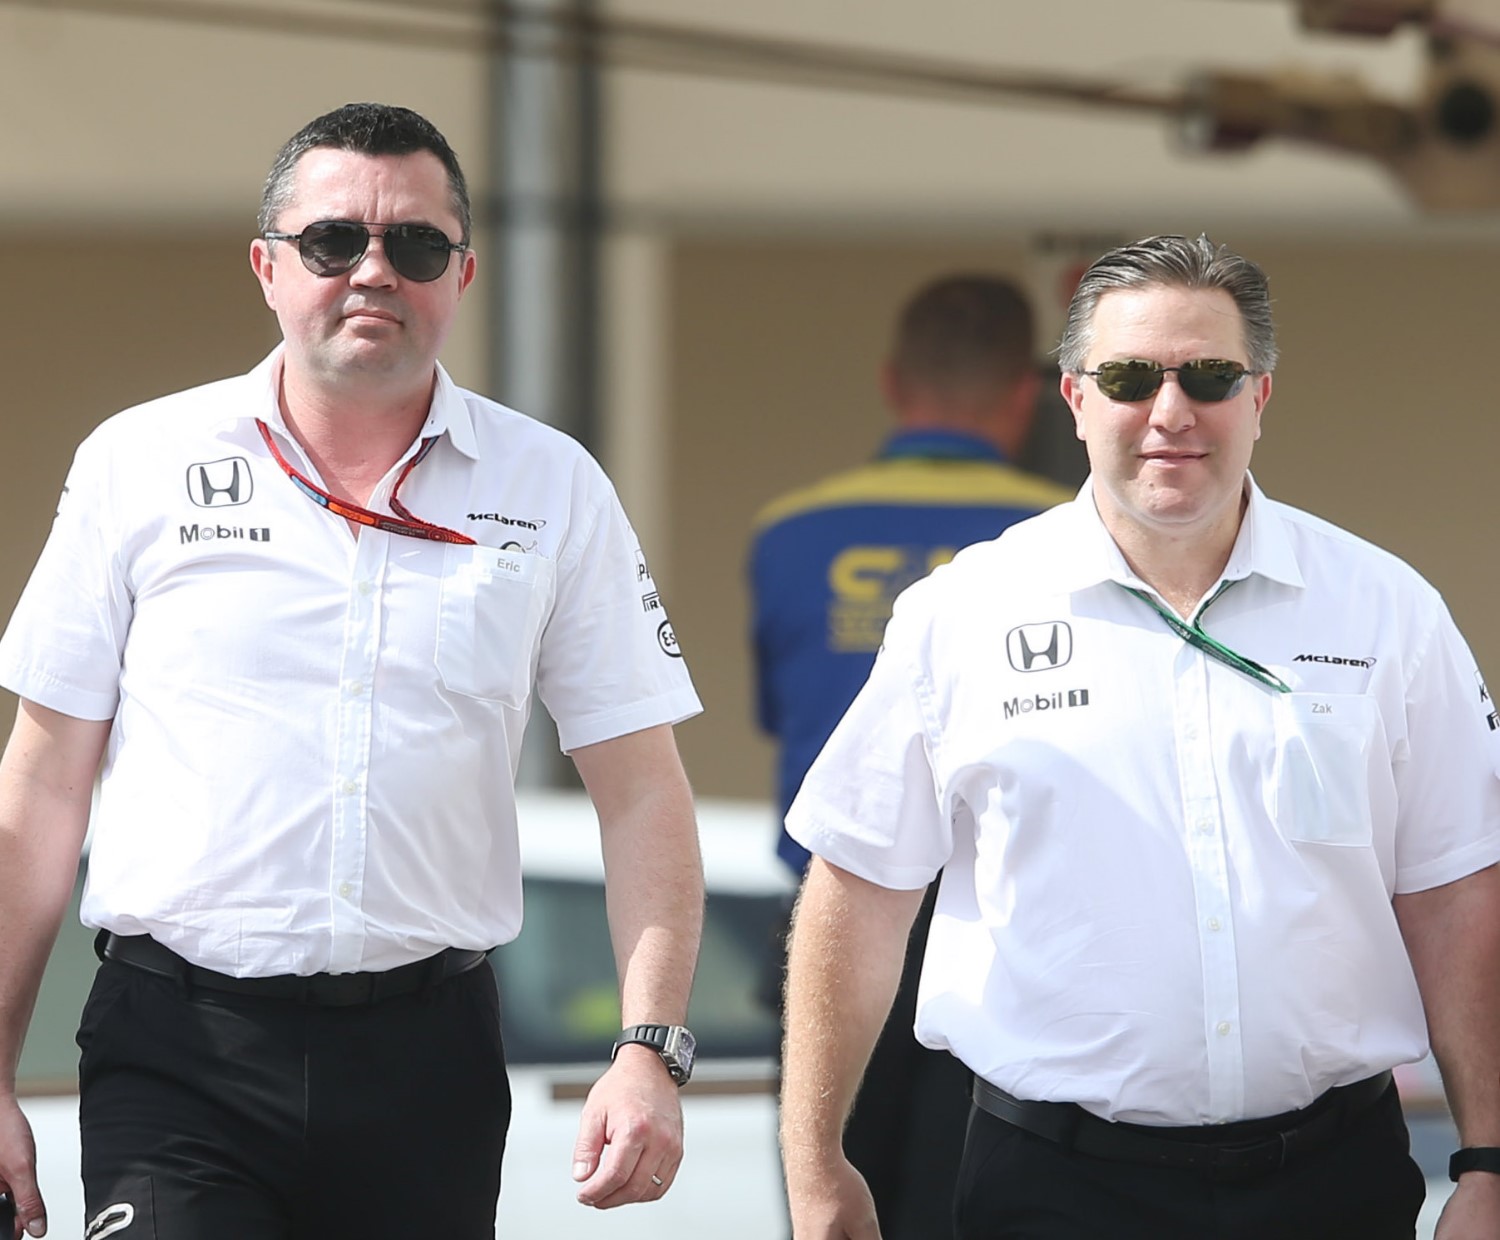 Boullier and Brown arrive at the Abu Dhabi circuit